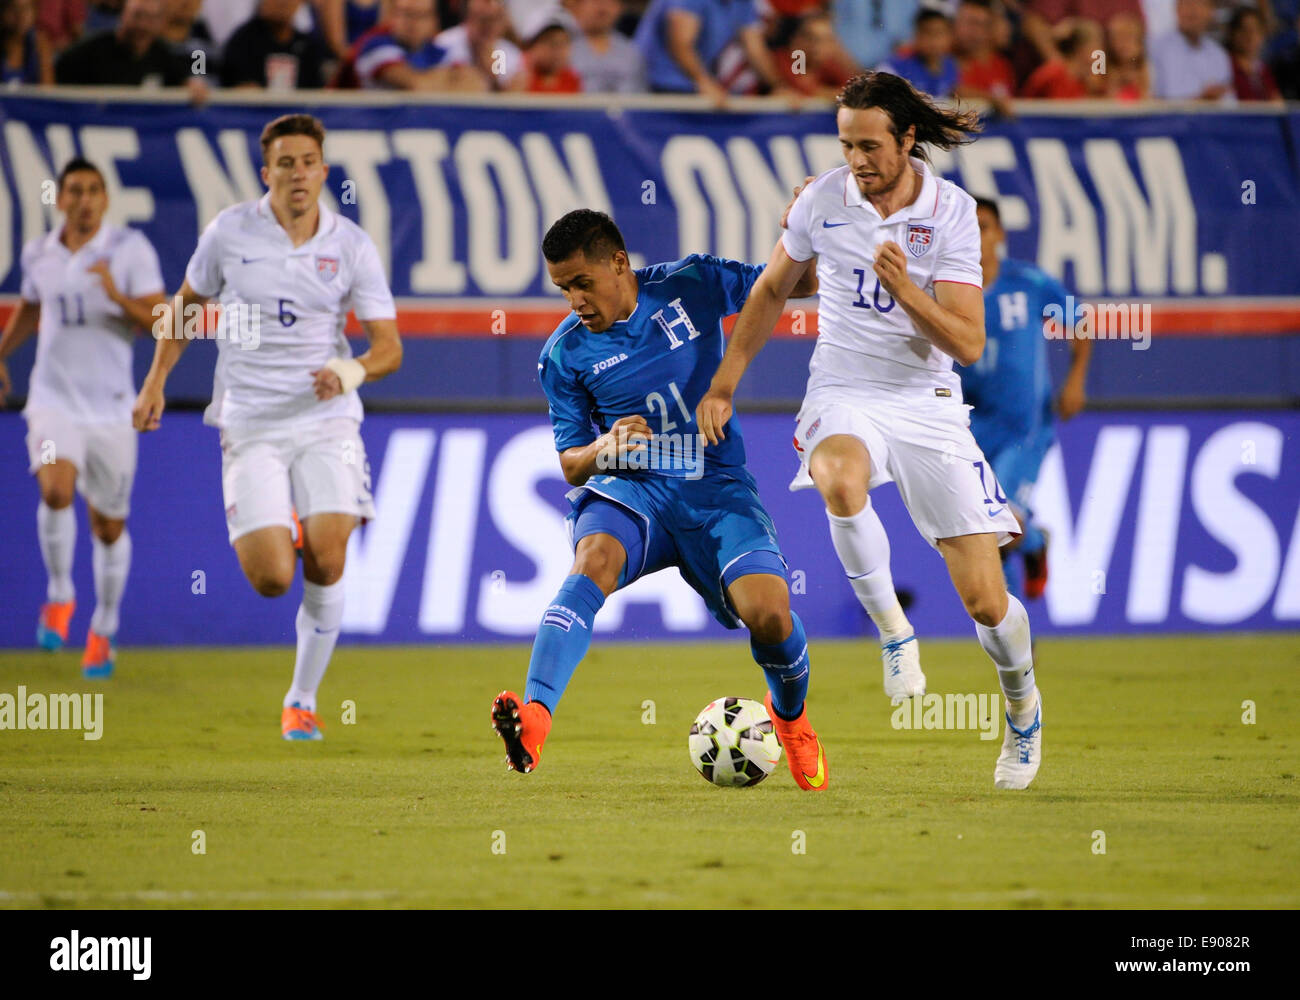 Florida, USA. 14th Oct, 2014. Honduras Forward Roger Rojas (21) and United States Midfielder Mix Diskerud (10) fight for the ball during the international friendly between the US Men's National Team and Honduras at FAU Stadium in Boca Raton, Florida © Action Plus Sports/Alamy Live News Stock Photo